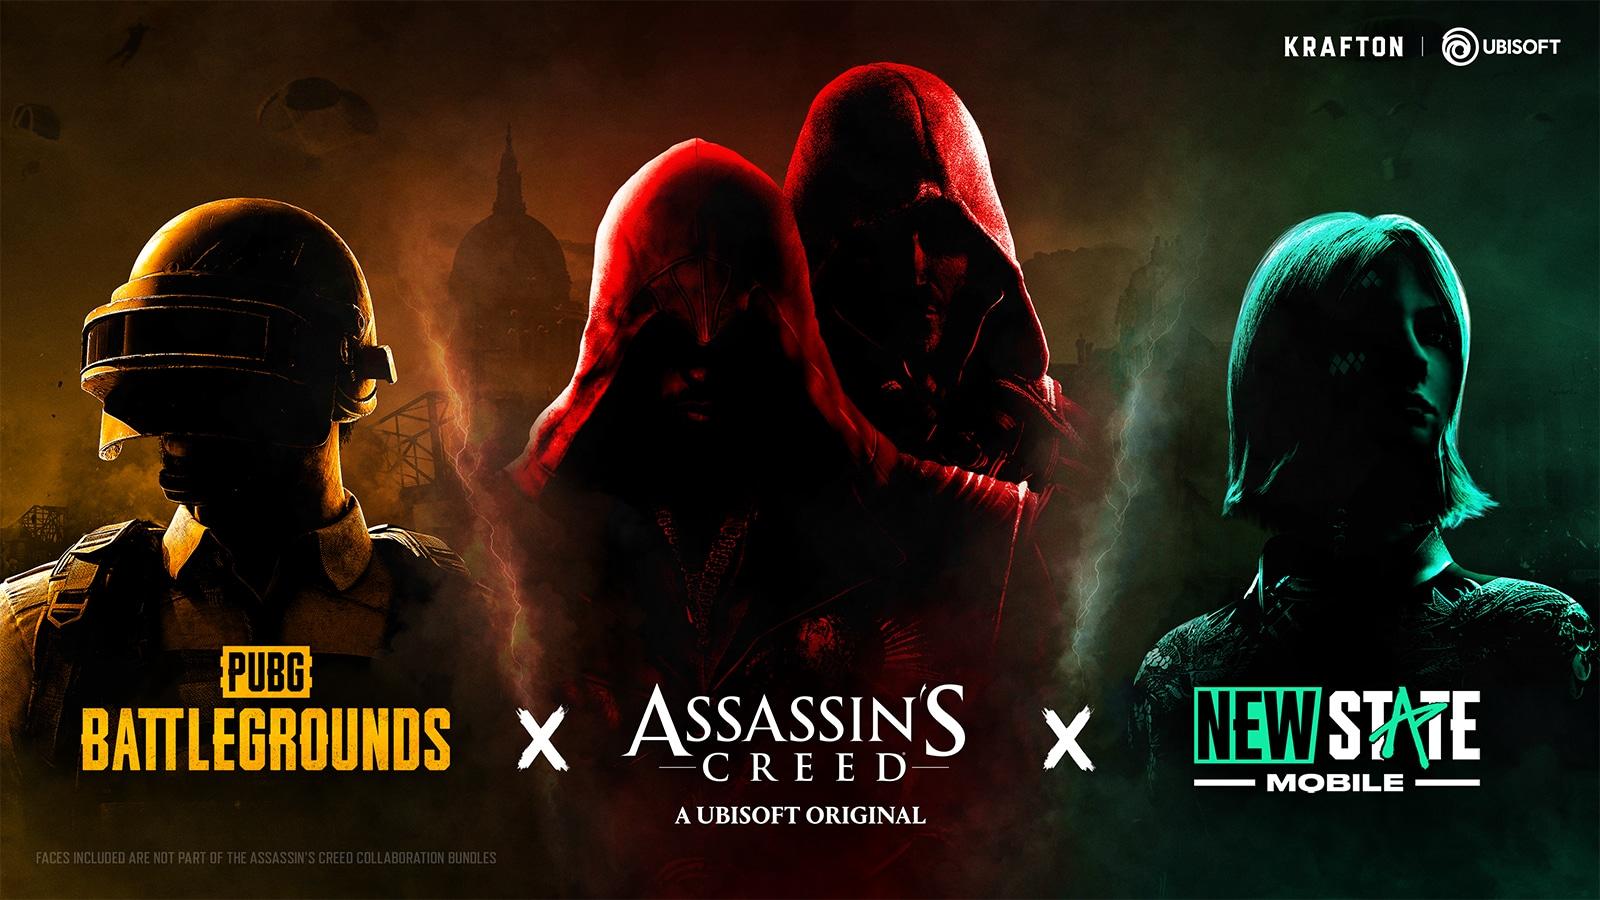 official image of PUBG Battlegrounds and Assassin's Creed crossover event